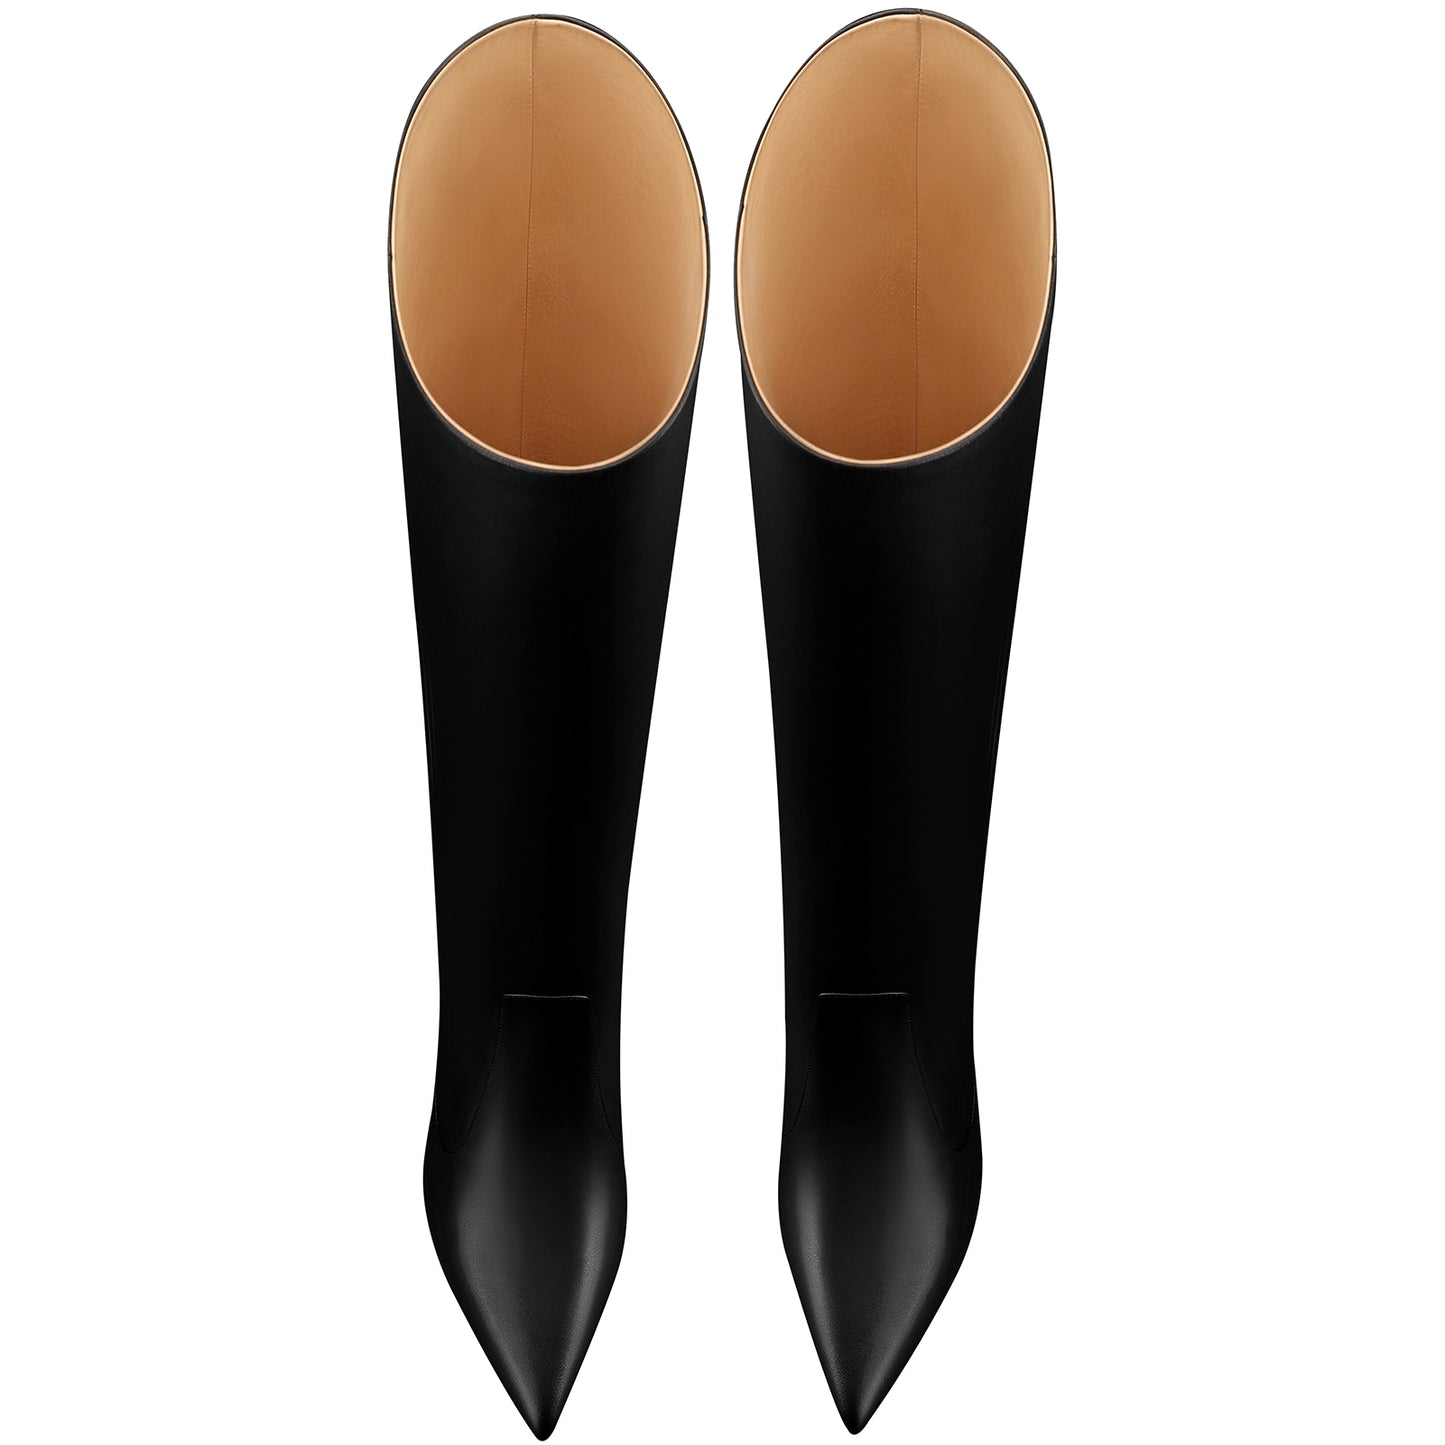 High Heels Leather Boots, Pointed Toe Pull On High Boots Chunky